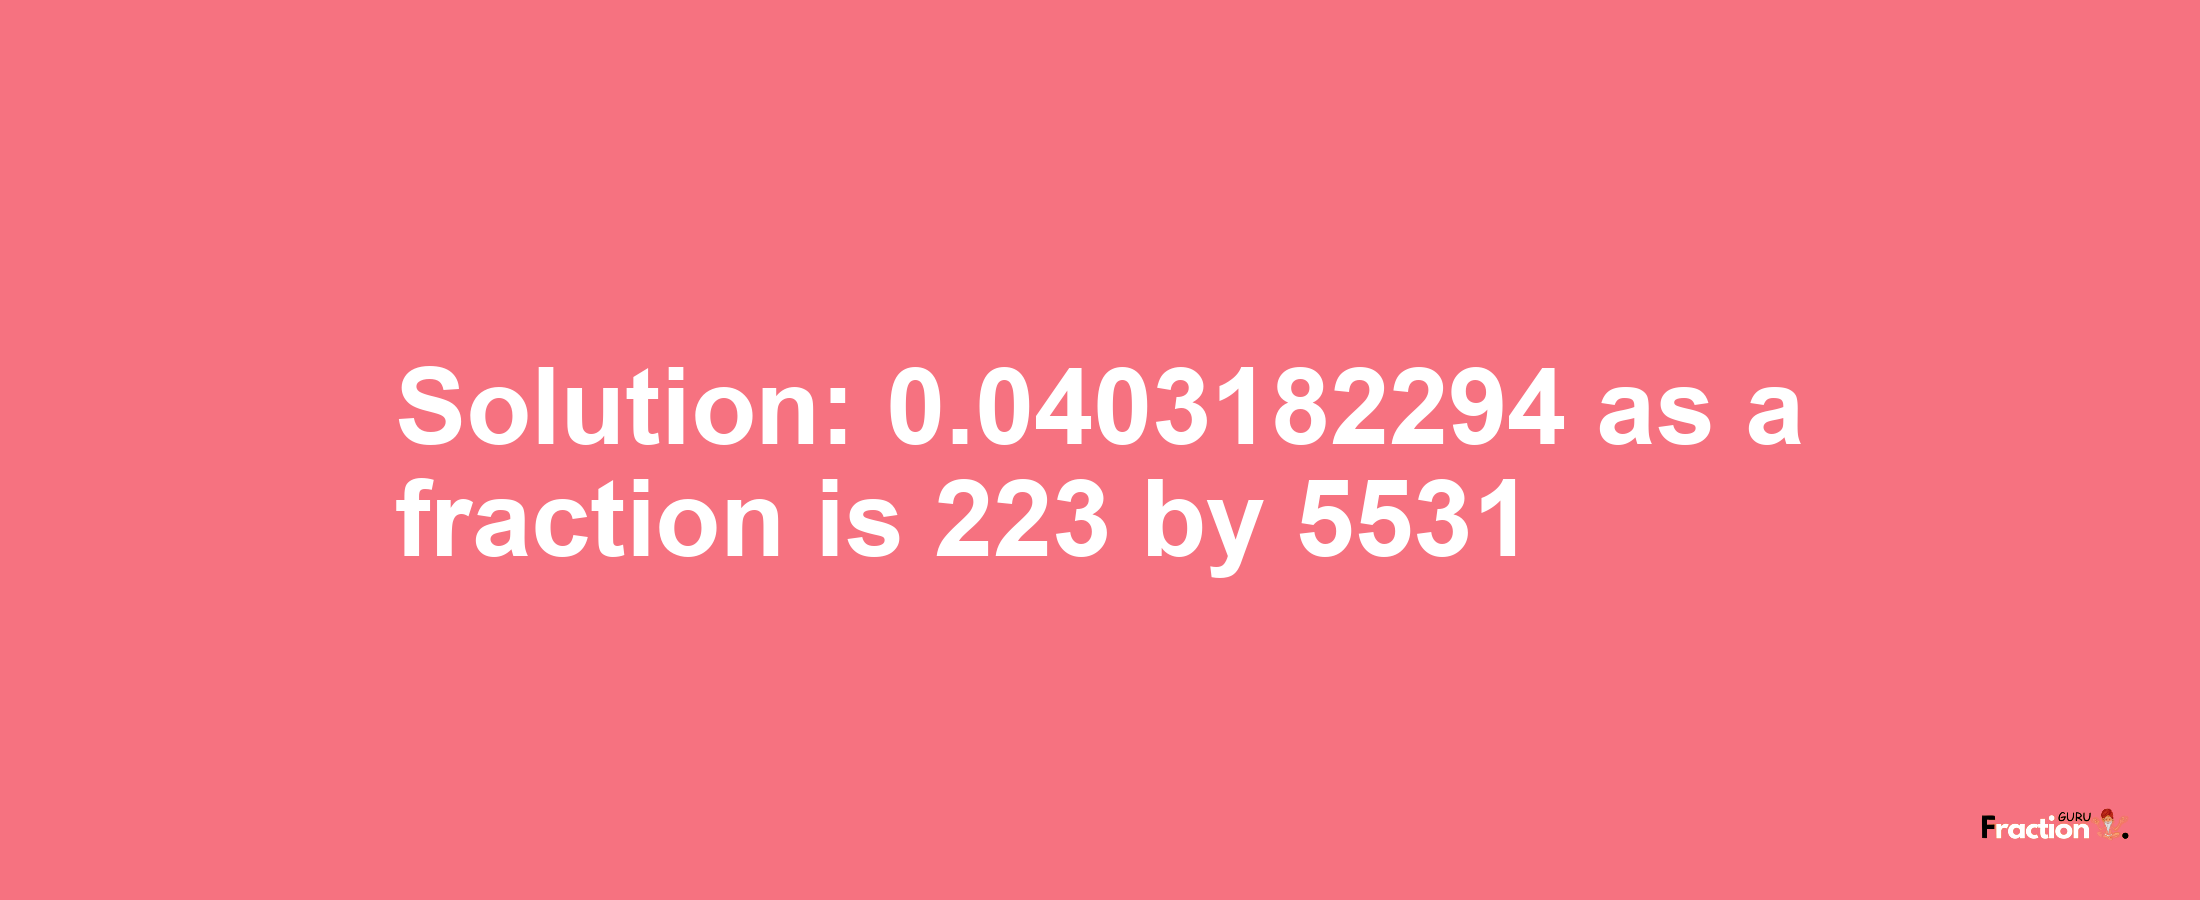 Solution:0.0403182294 as a fraction is 223/5531